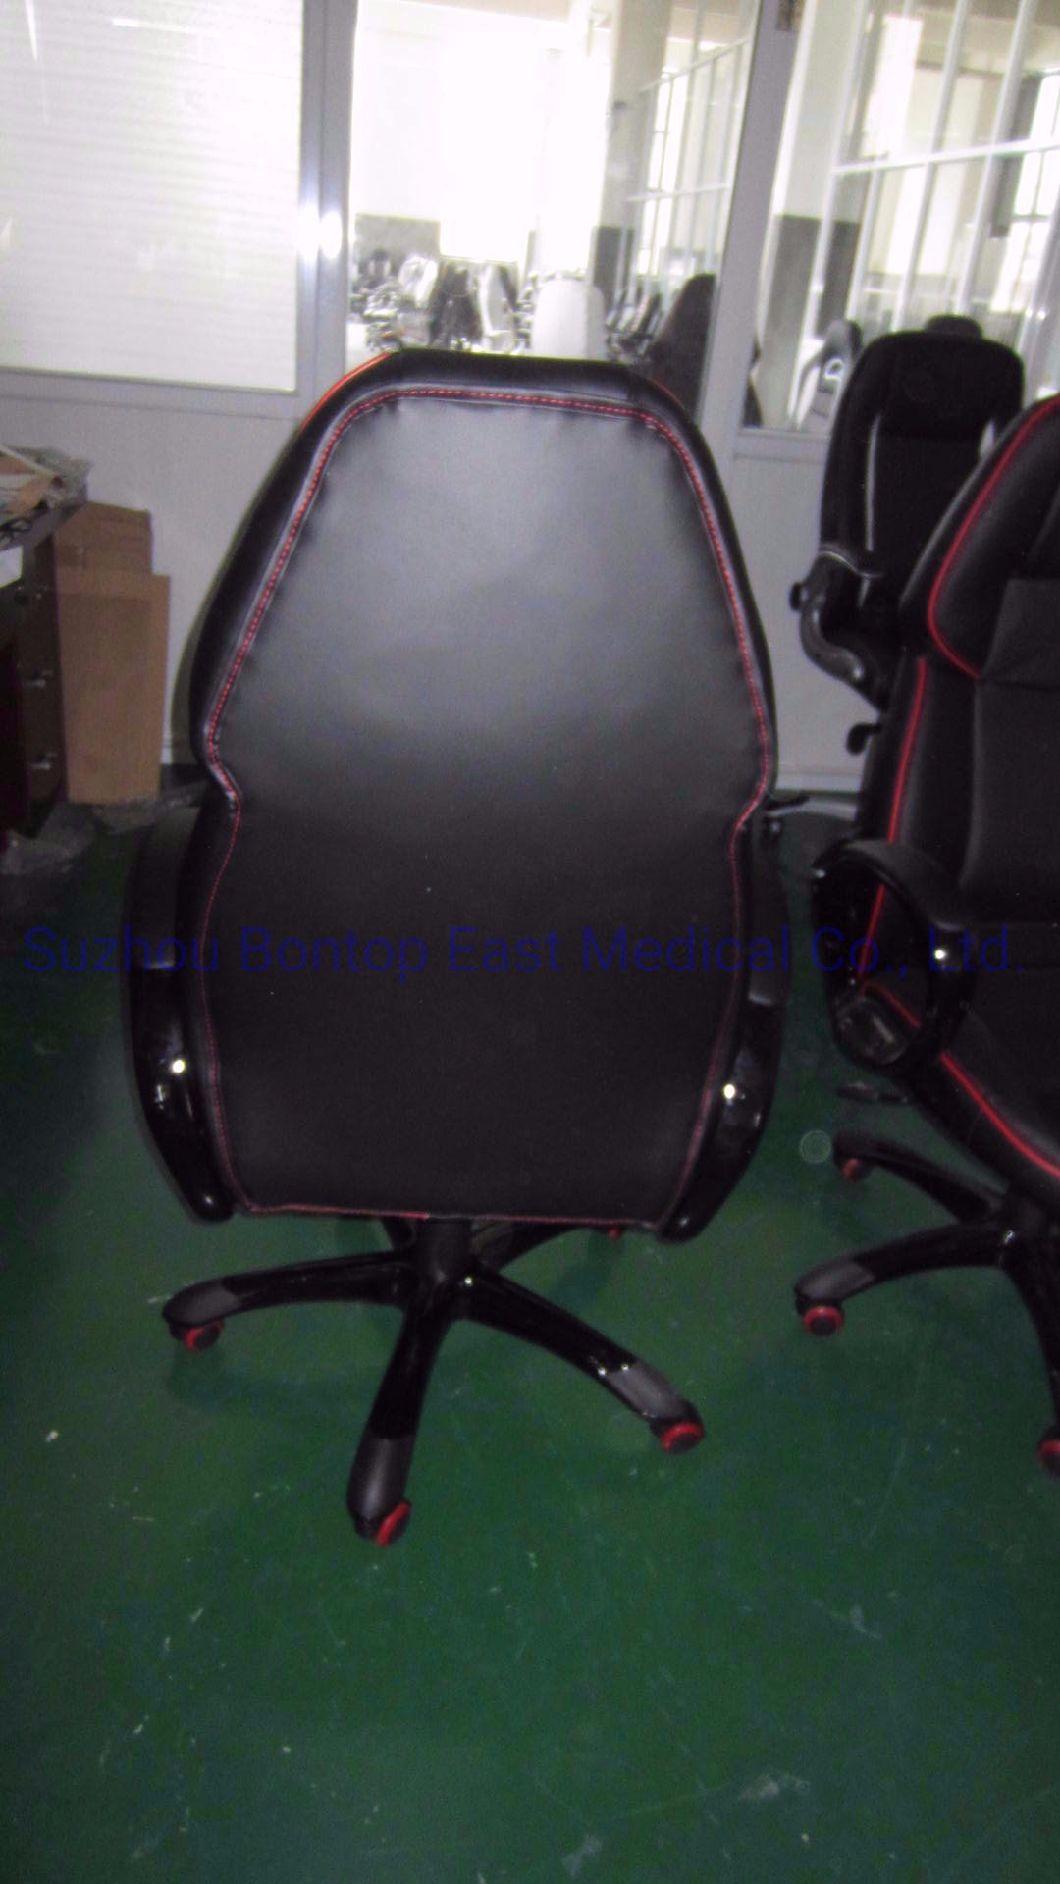 Modern Office Furniture High Back PU + PVC Leather Swivel Office Chair